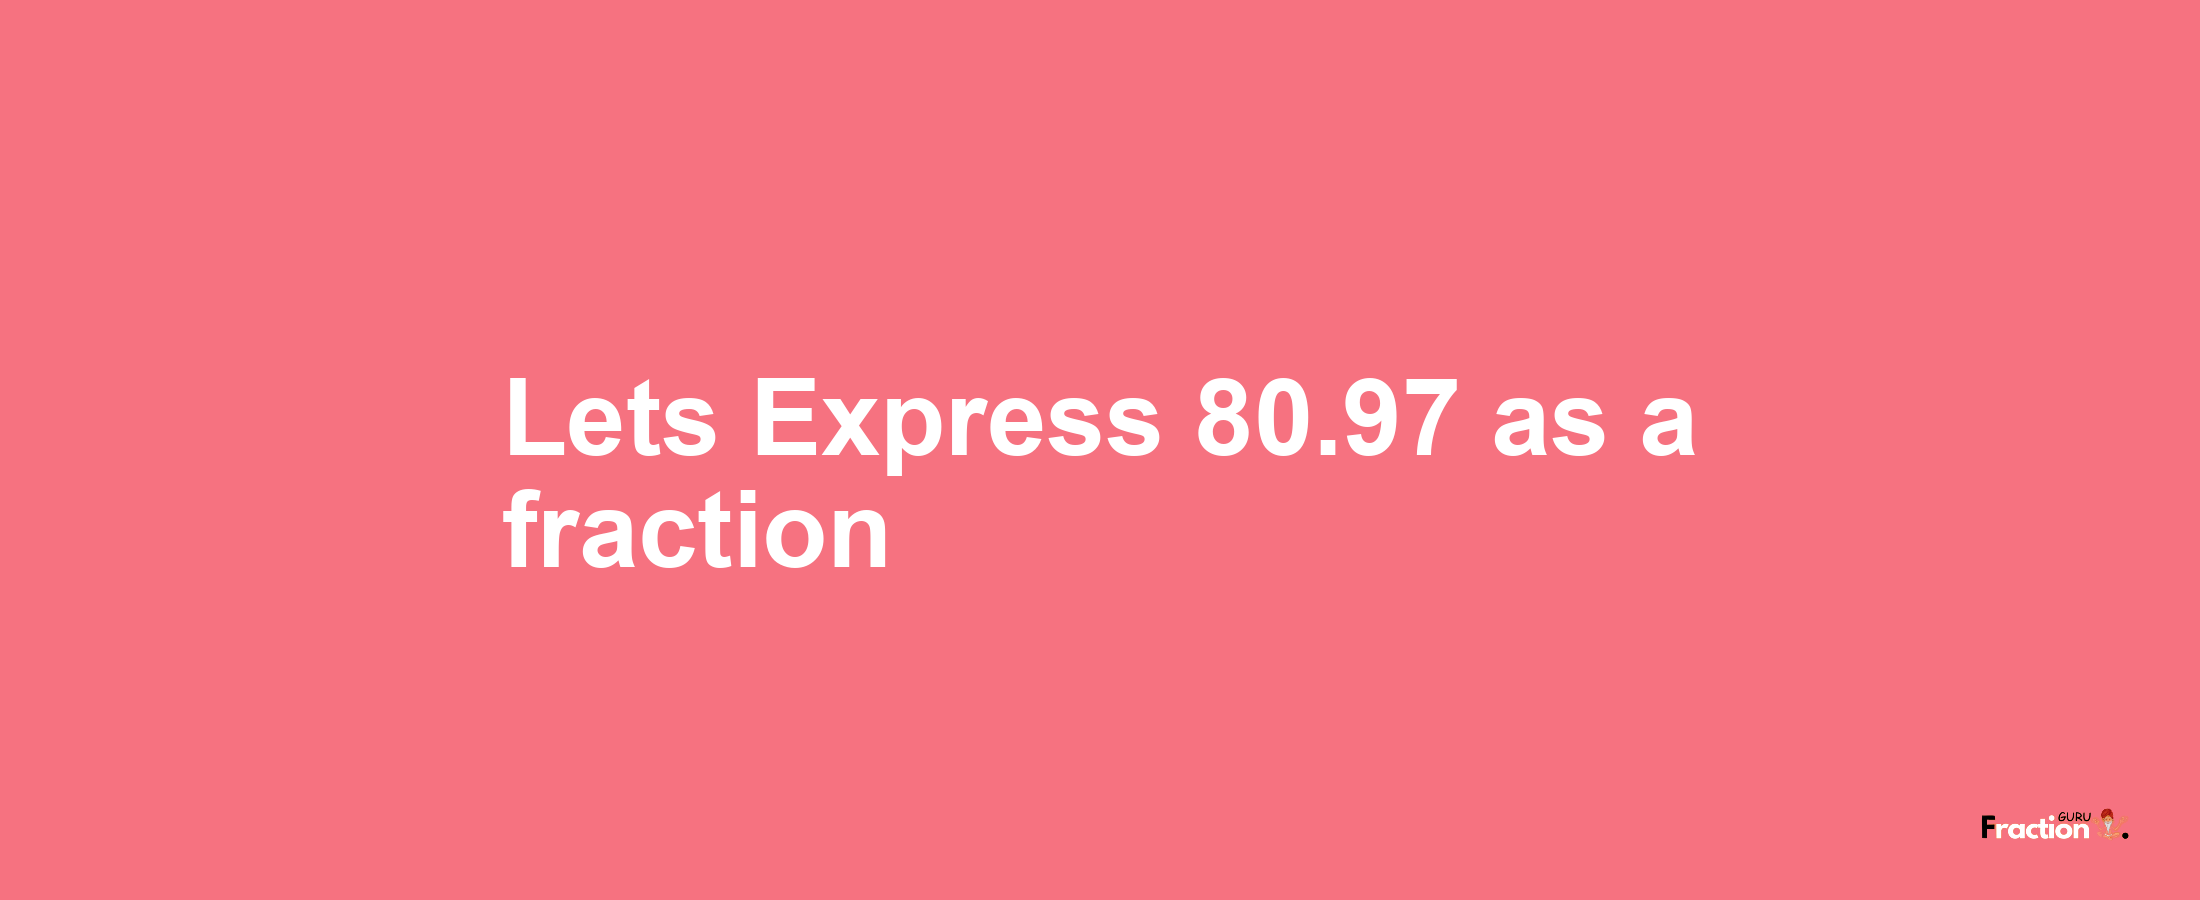 Lets Express 80.97 as afraction